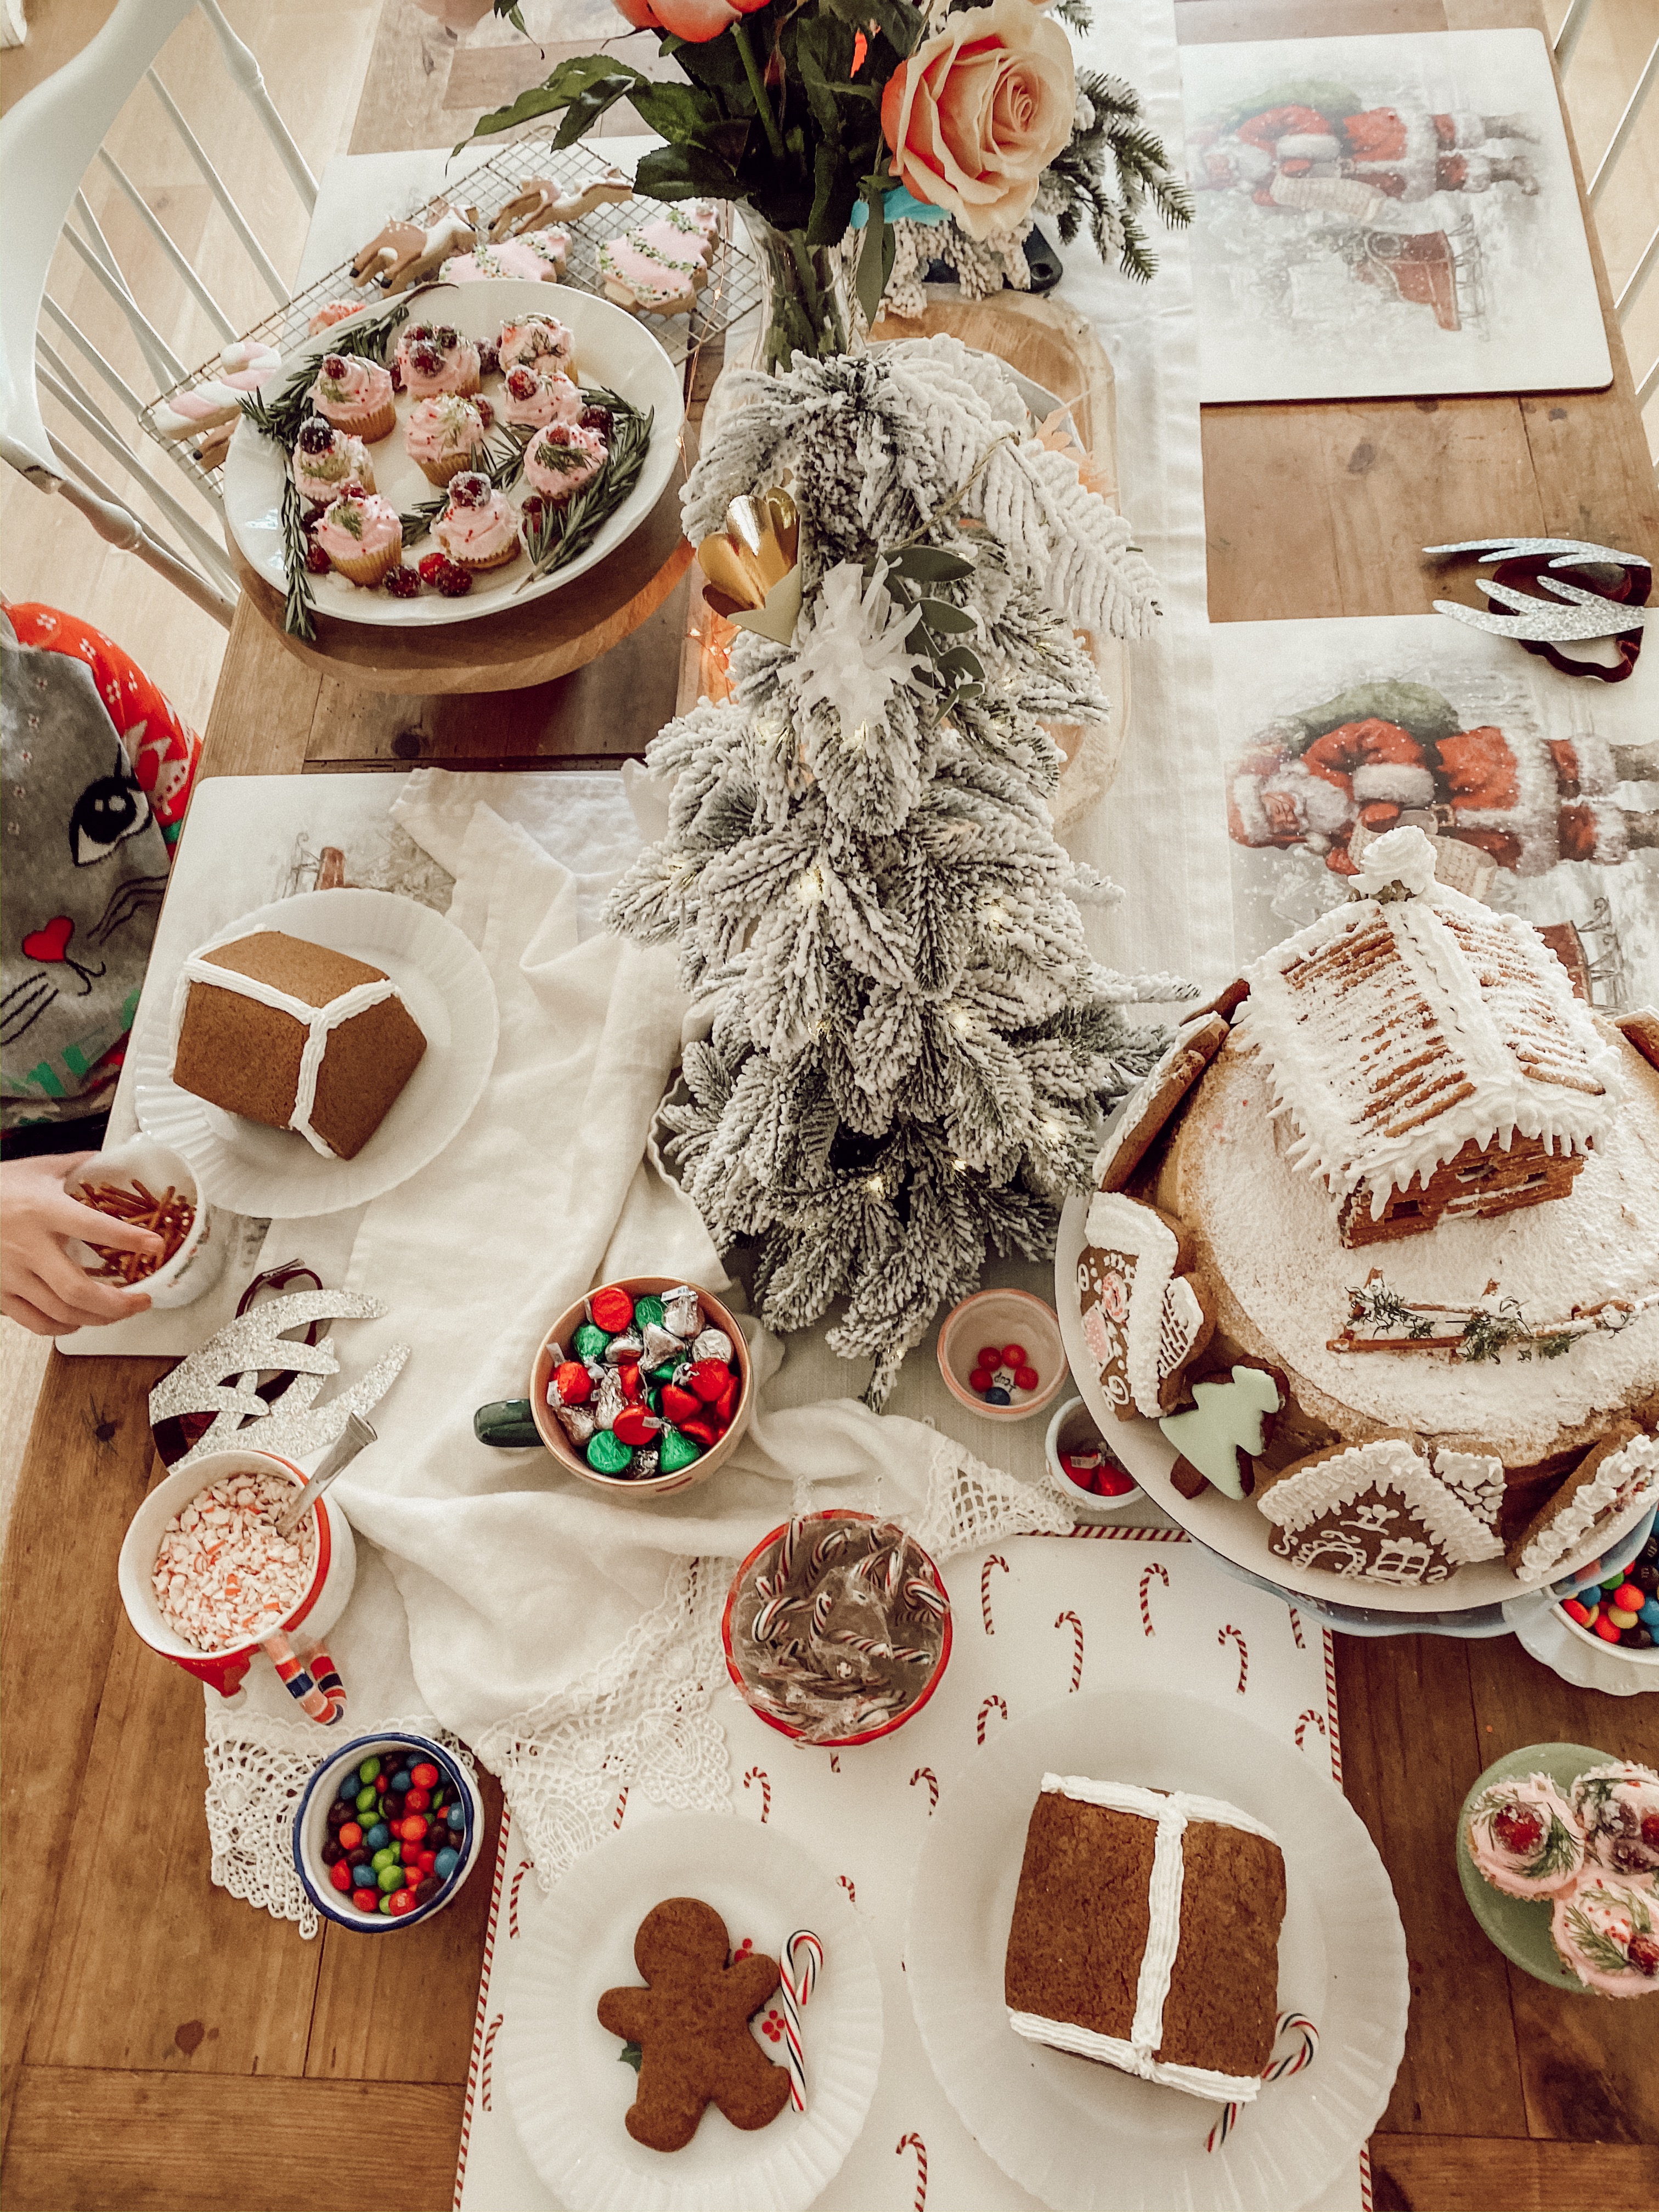 Gingerbread Houses with Kids - Casey Wiegand of The Wiegands